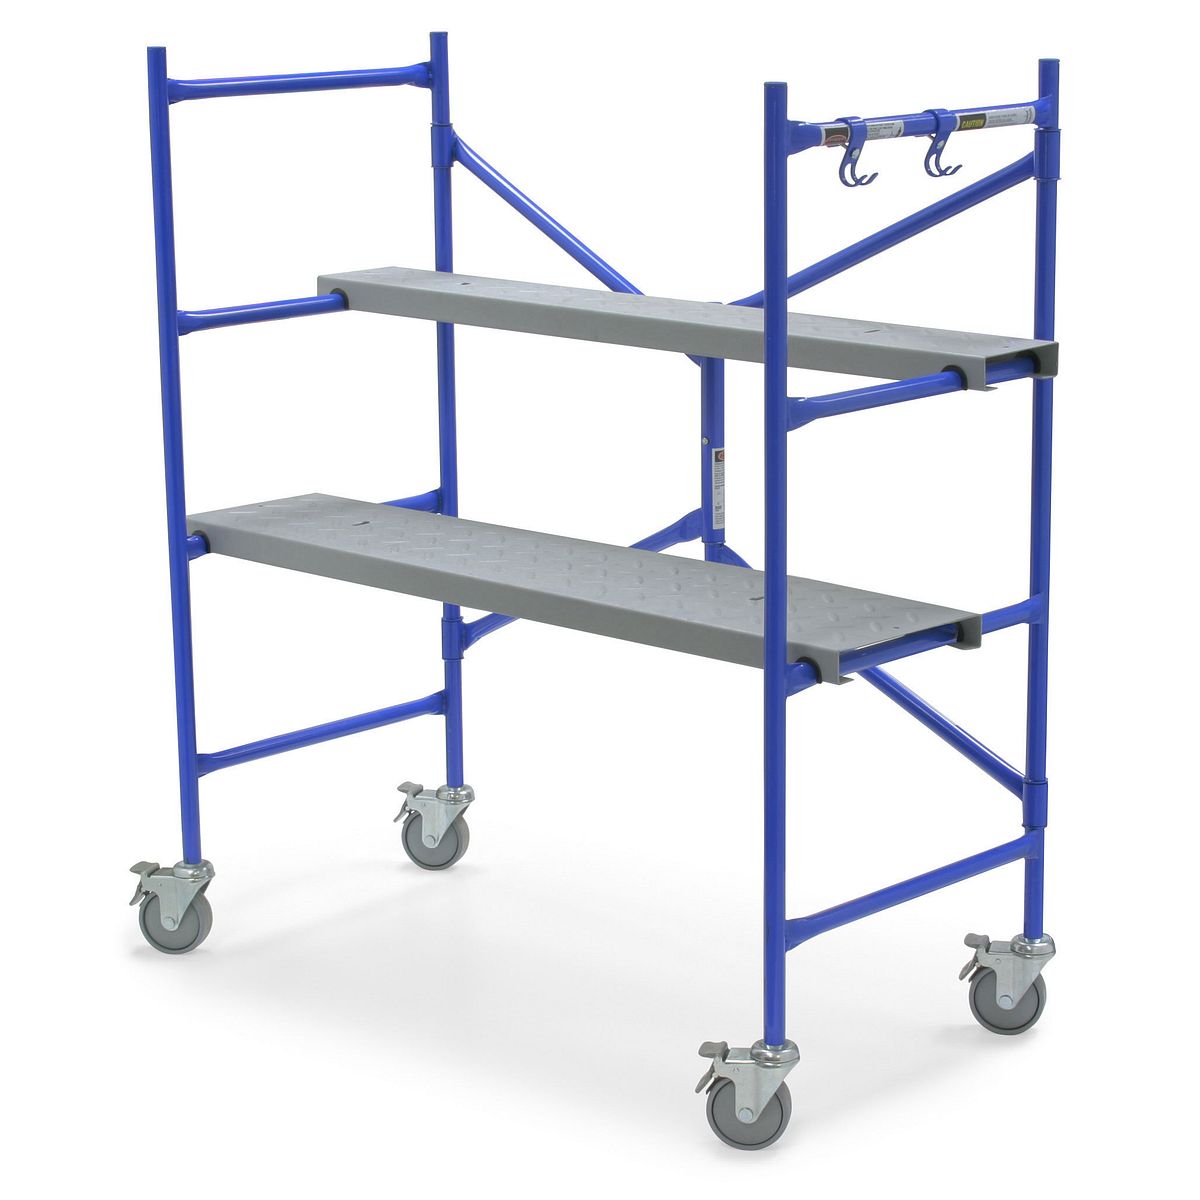 PS-48 Series | Rolling Scaffolds | Werner US